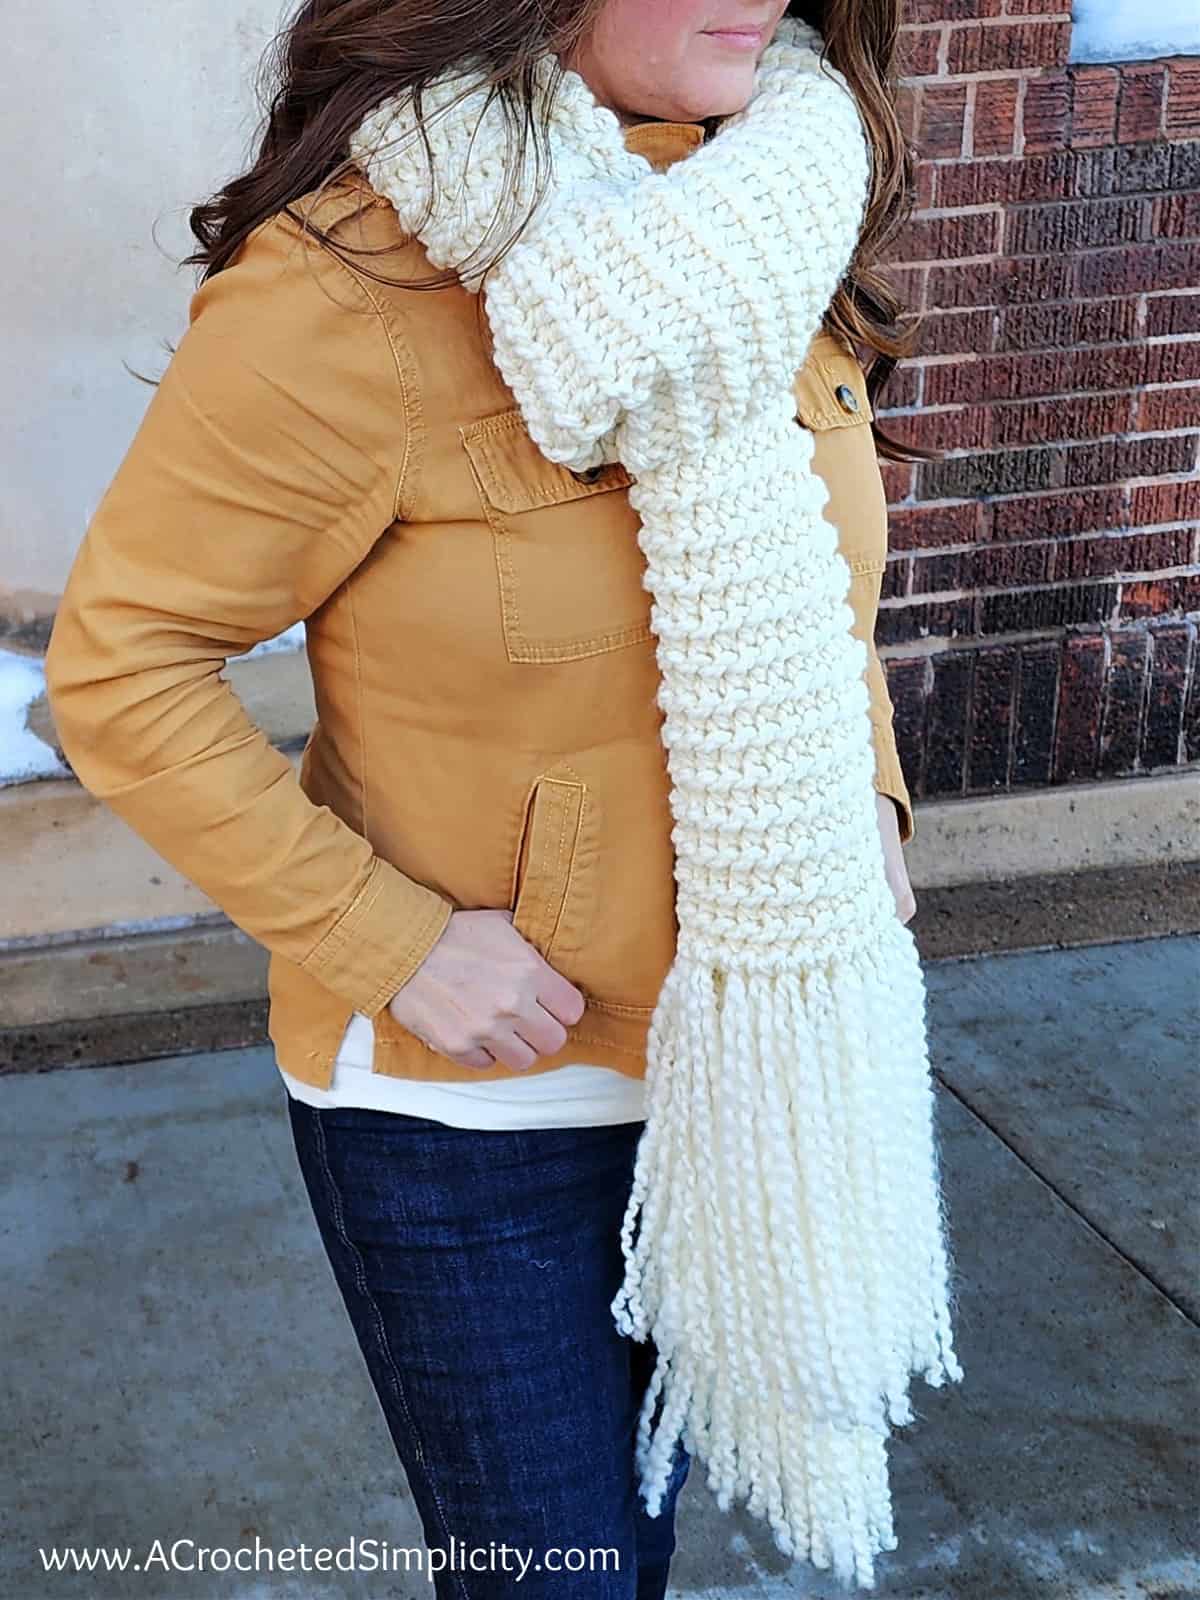 Woman wearing a cream colored knit look crochet scarf in front of brick building.